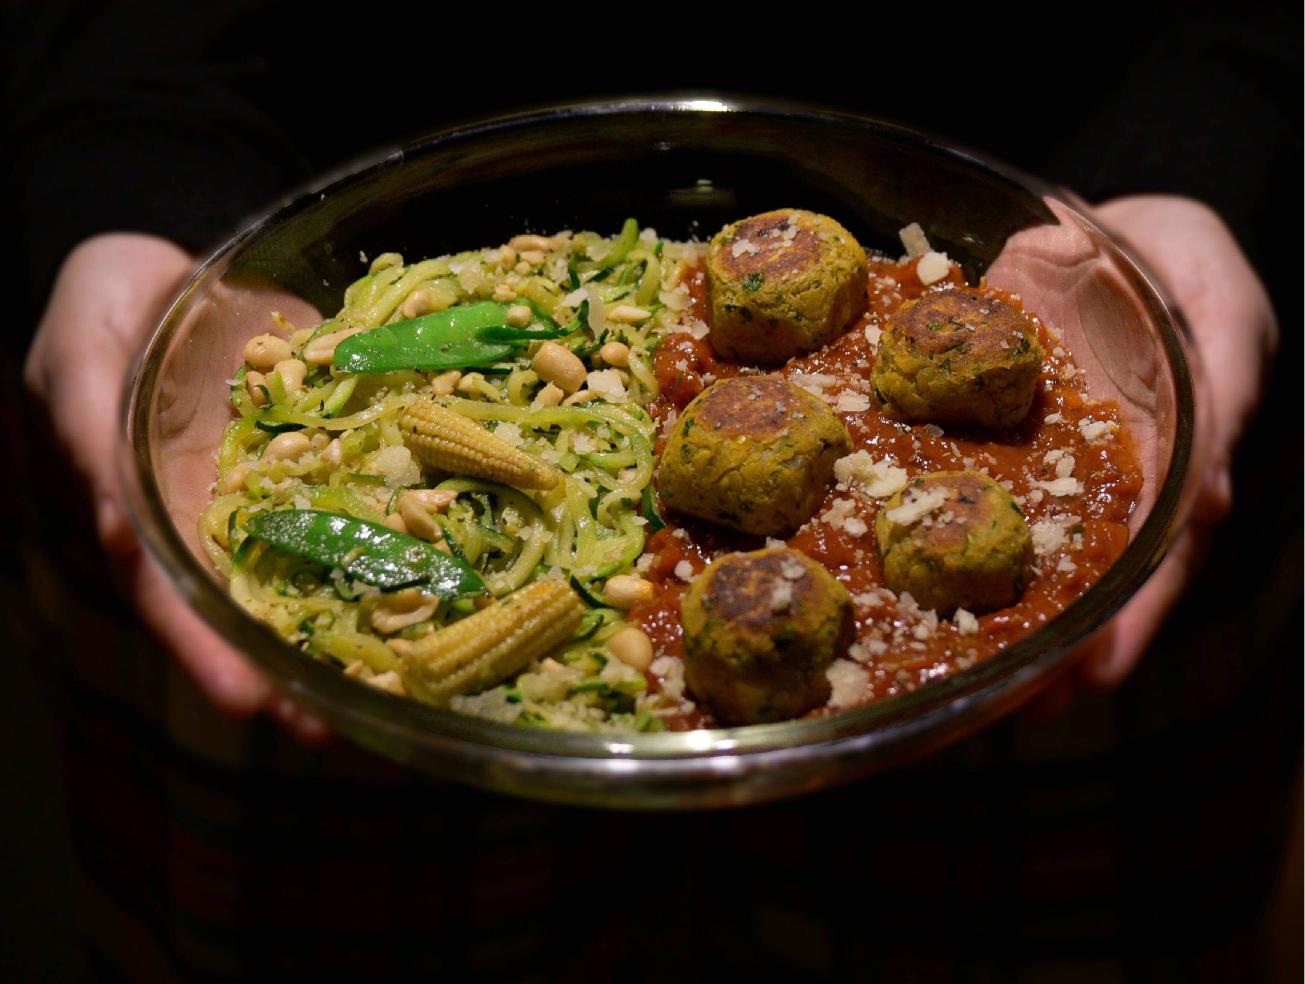 Baked Lentil & Oats ‘no-meat’ balls served with stir-fried Zuccini ribbons!